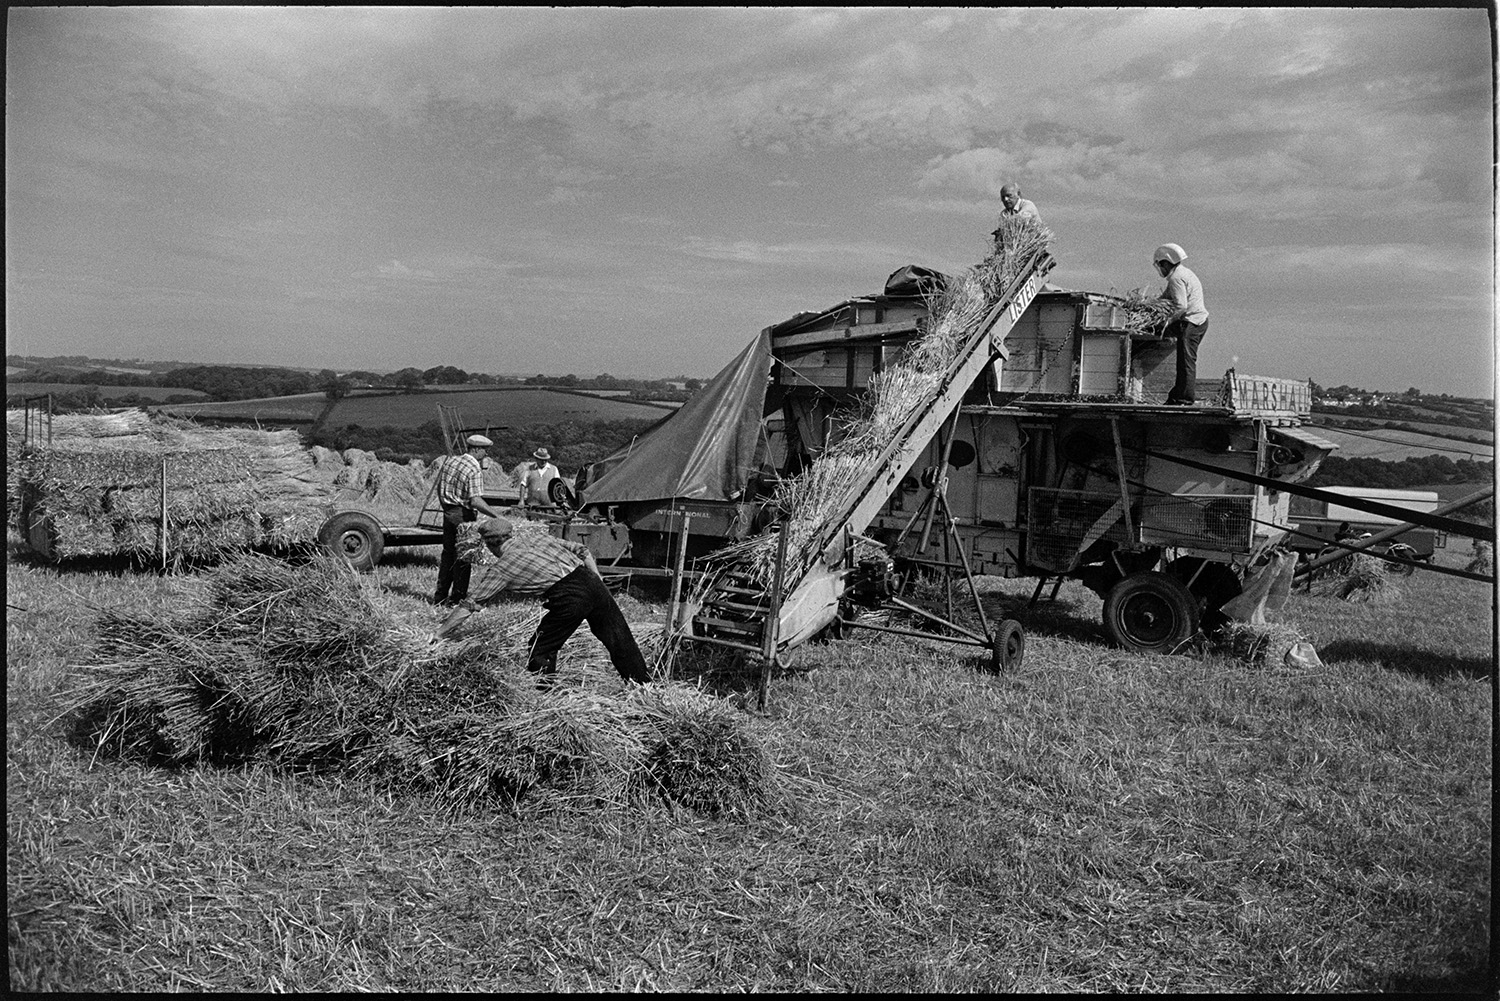 Reed combing in harvest field men carrying nitches of wheat to reed comber.
[Men, possibly from the Down family, working with a reed comber in a field at Spittle, Chulmleigh. One man is  lifting bundles of wheat onto the elevator to be processed by the reed comber. Another man on the reed comber is wearing a helmet.]